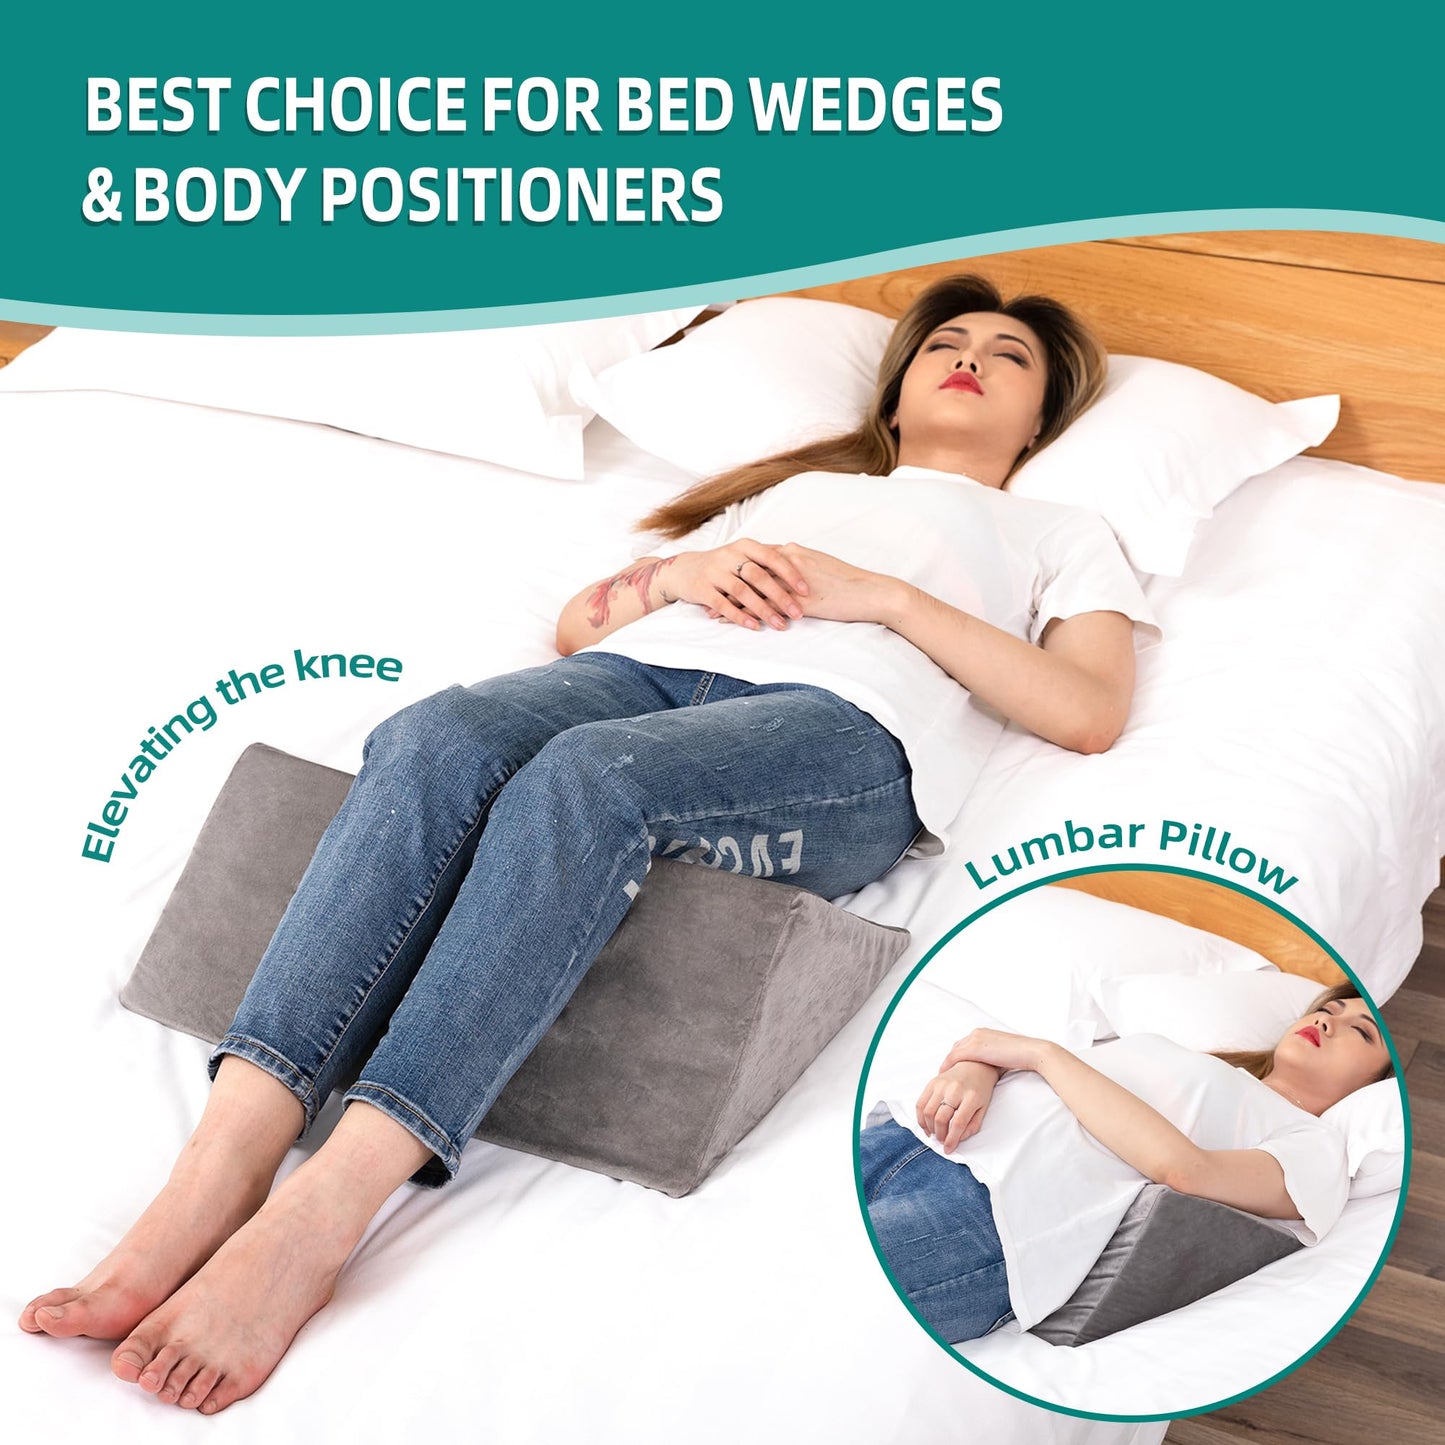 TYYIHUA Bed Wedges & Body Positioners for Elderly and Adults (3 in 1), 40 Degree Triangle Wedges for Bed Positioning, Side Wedge Pillows for After Surgery, Bed Wedges for Bedsores, Wedges for Body